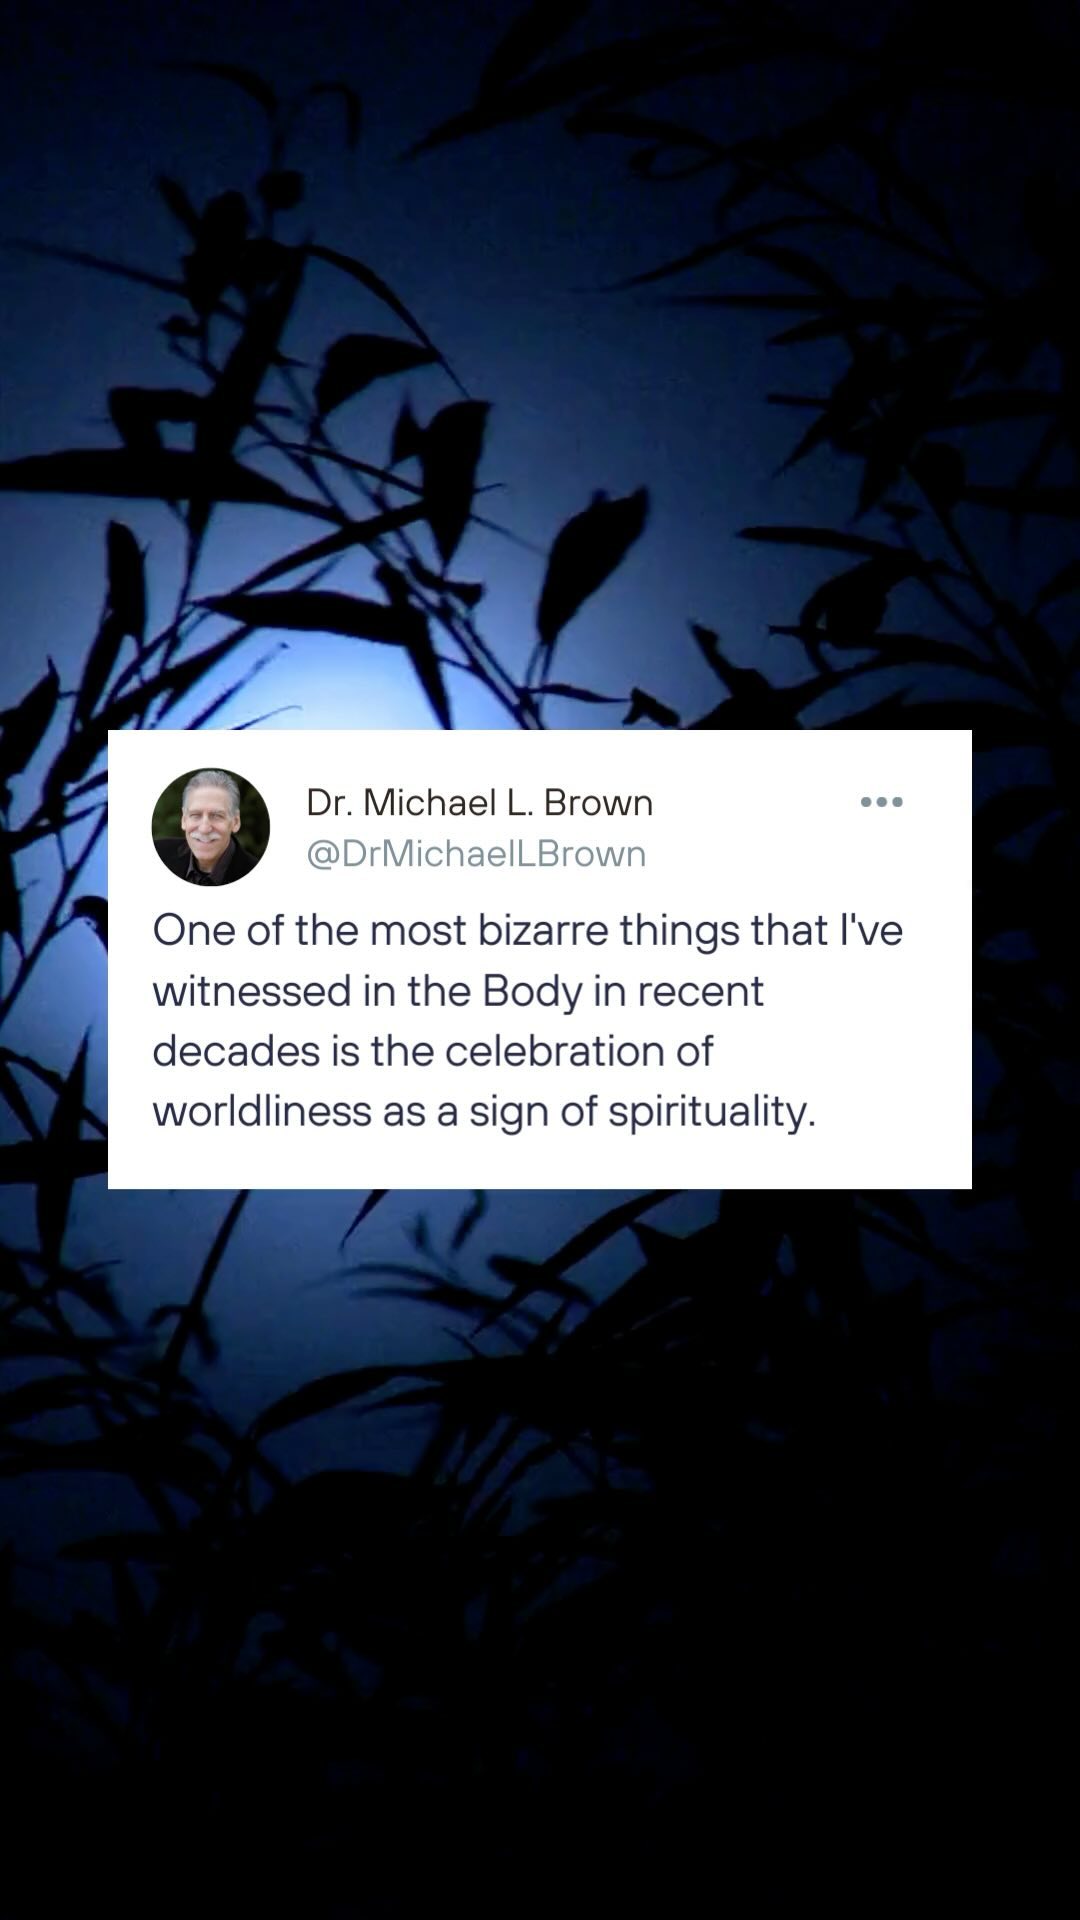 One of the most bizarre things that I've witnessed in the Body in recent decades is the celebration of worldliness as a sign of spirituality.#askdrbrown #drbrownquotes #famousquotes #quotestoinspire #Godswork #twitter #politics #views #quotestoinspire #dailywisdom #faithhopelove